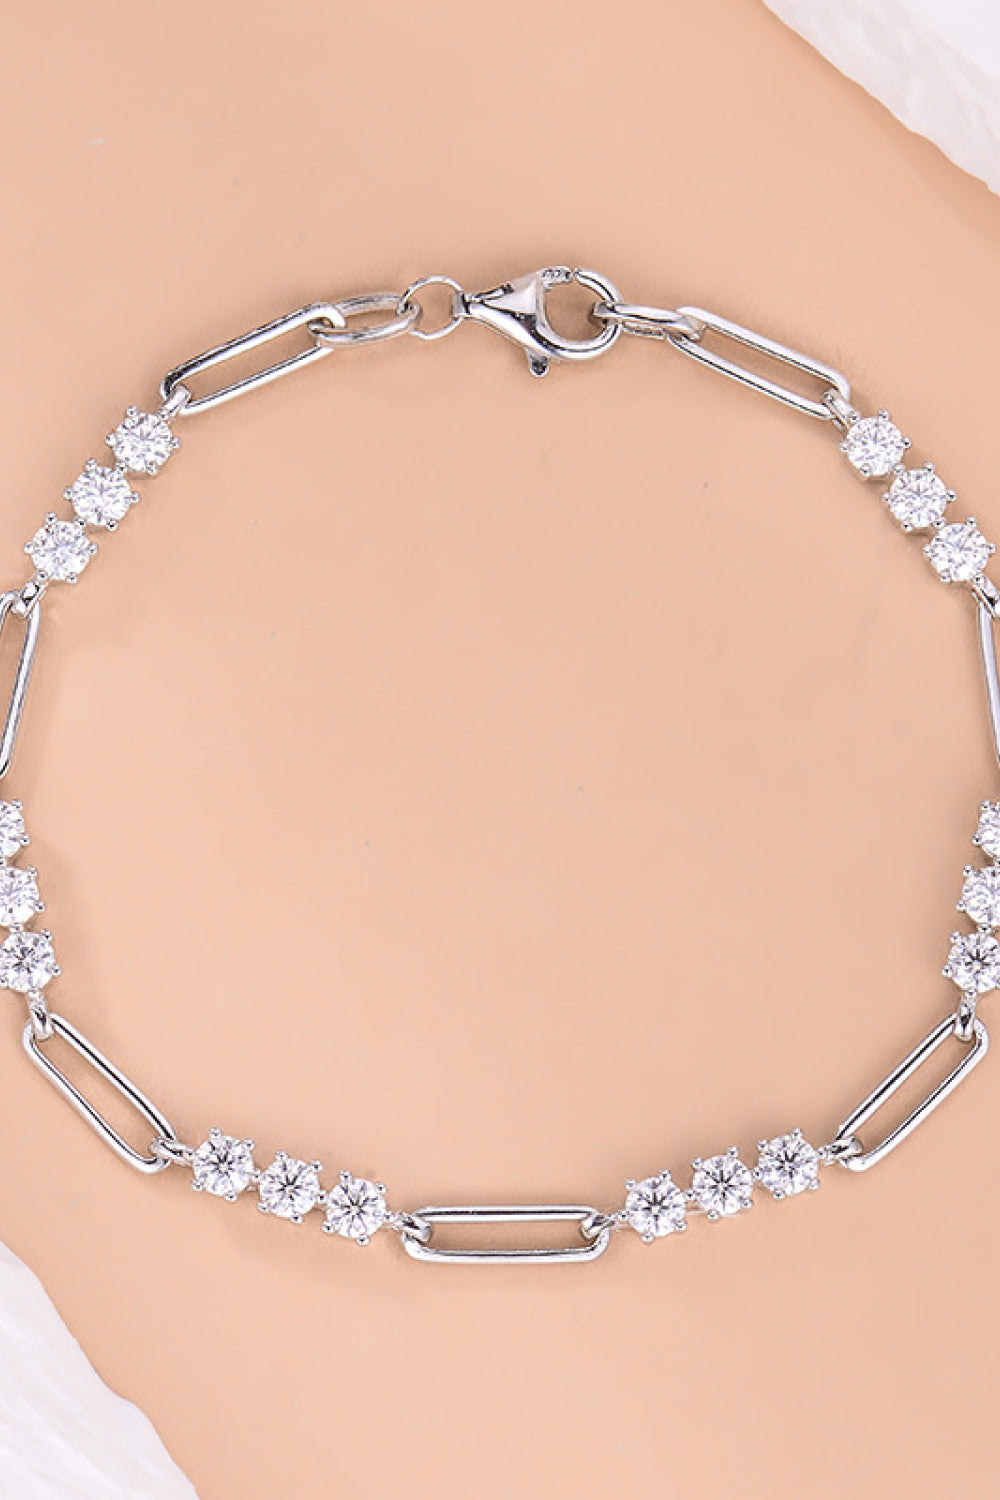 1.8 Carat Moissanite 925 Sterling Silver Bracelet - Kawaii Stop - 1.8 Carat, 925 Sterling Silver, Bracelet, Bracelets, Easy Care, Imported, Jewelry, Minimalist Style, Moissanite Bracelet, Premium Materials, Ship From Overseas, Shipping Delay 09/29/2023 - 10/04/2023, Y.T